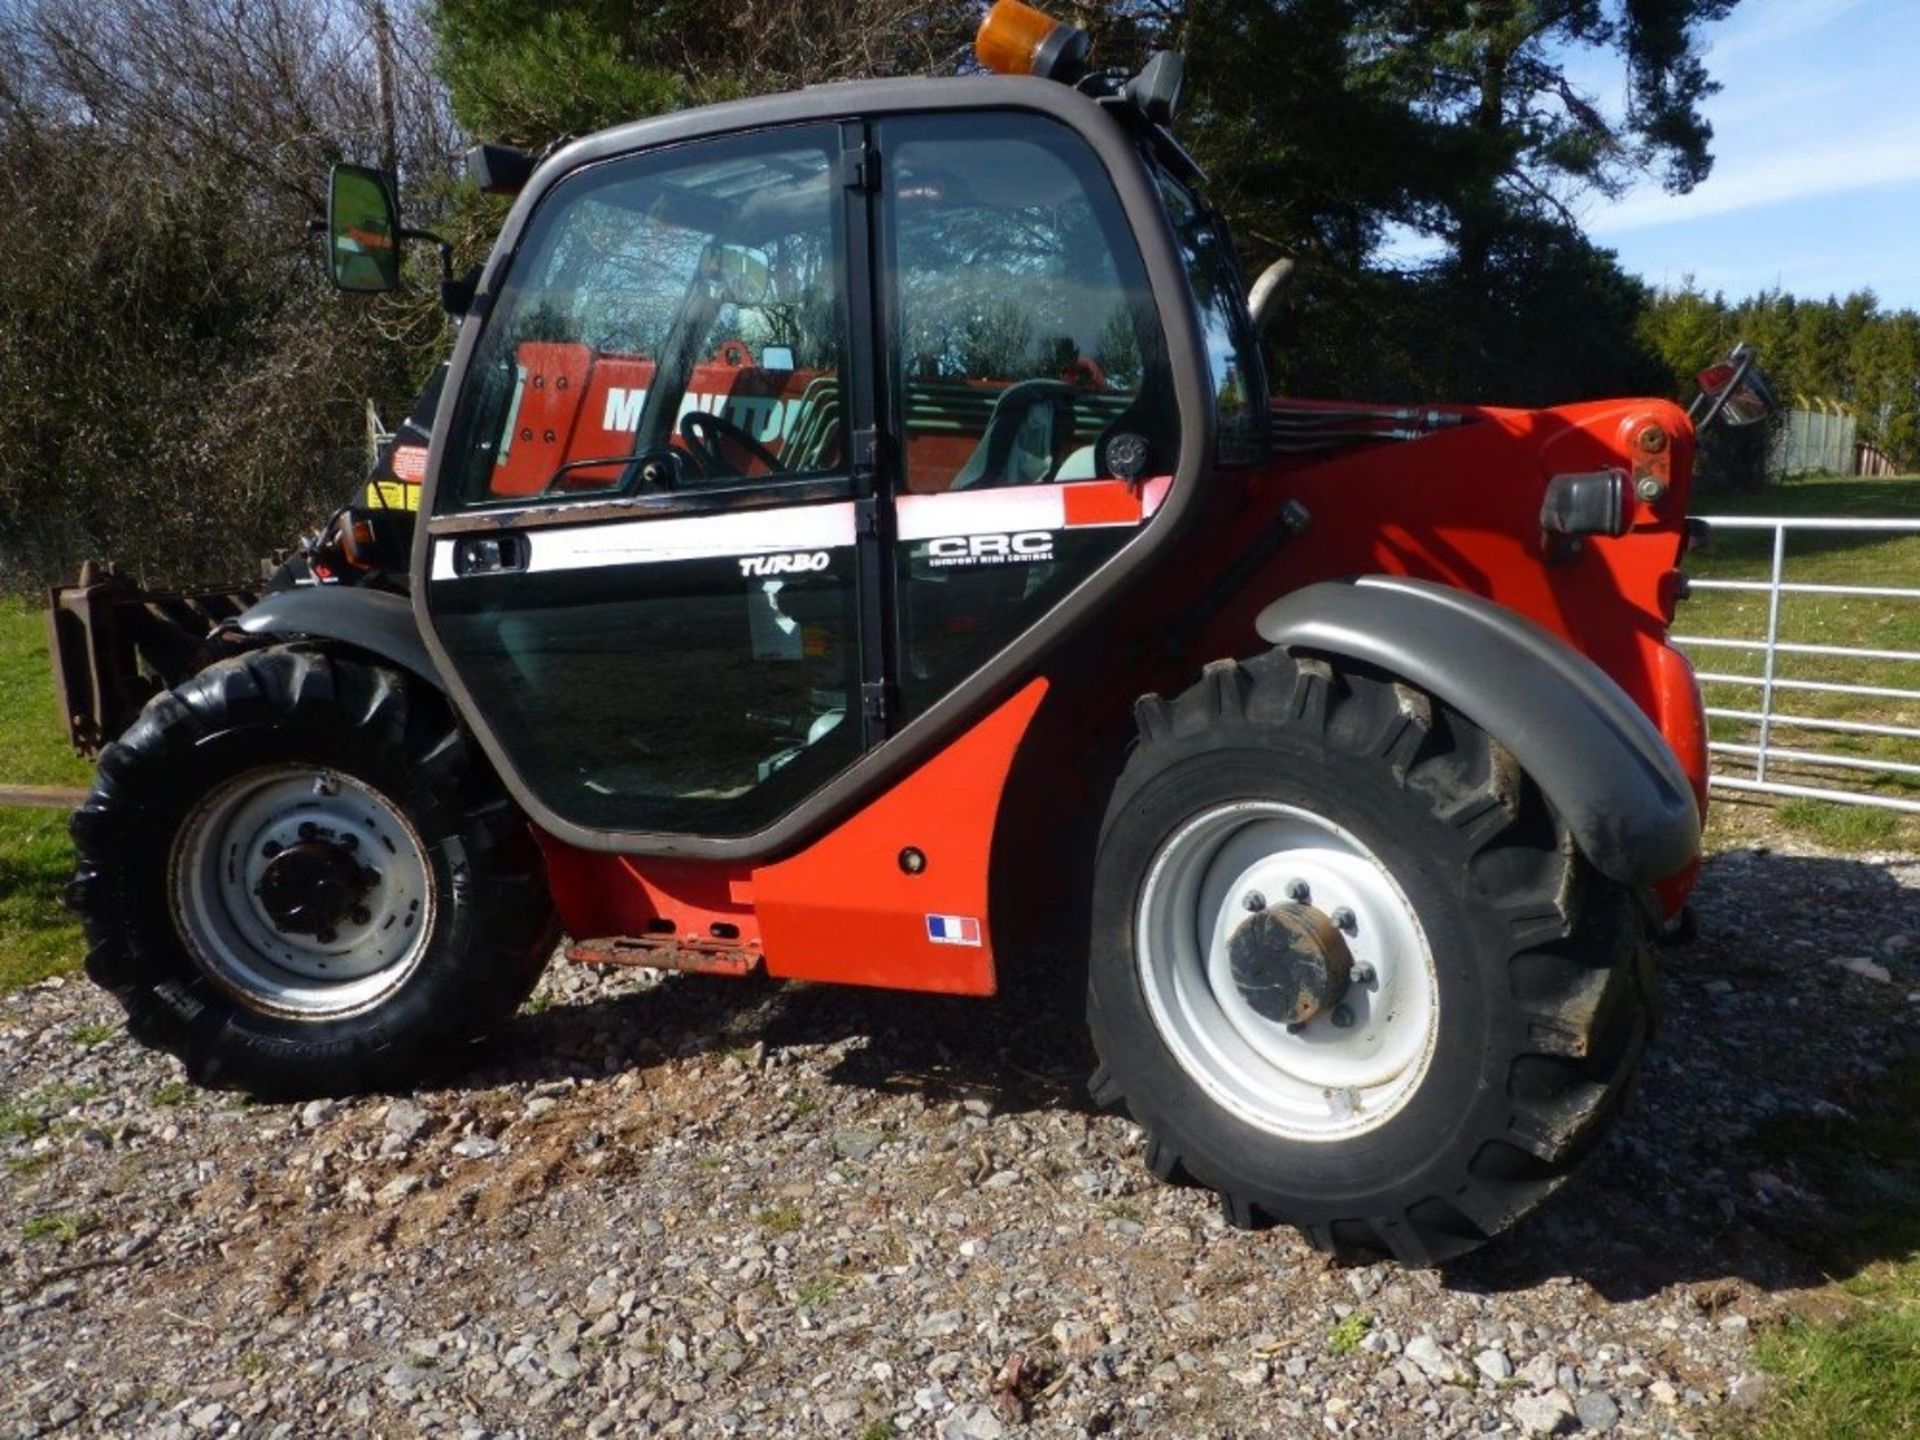 Manitou 634-120 LSU Turbo CRC Powershift with Air Con. 05 Reg - Image 2 of 5